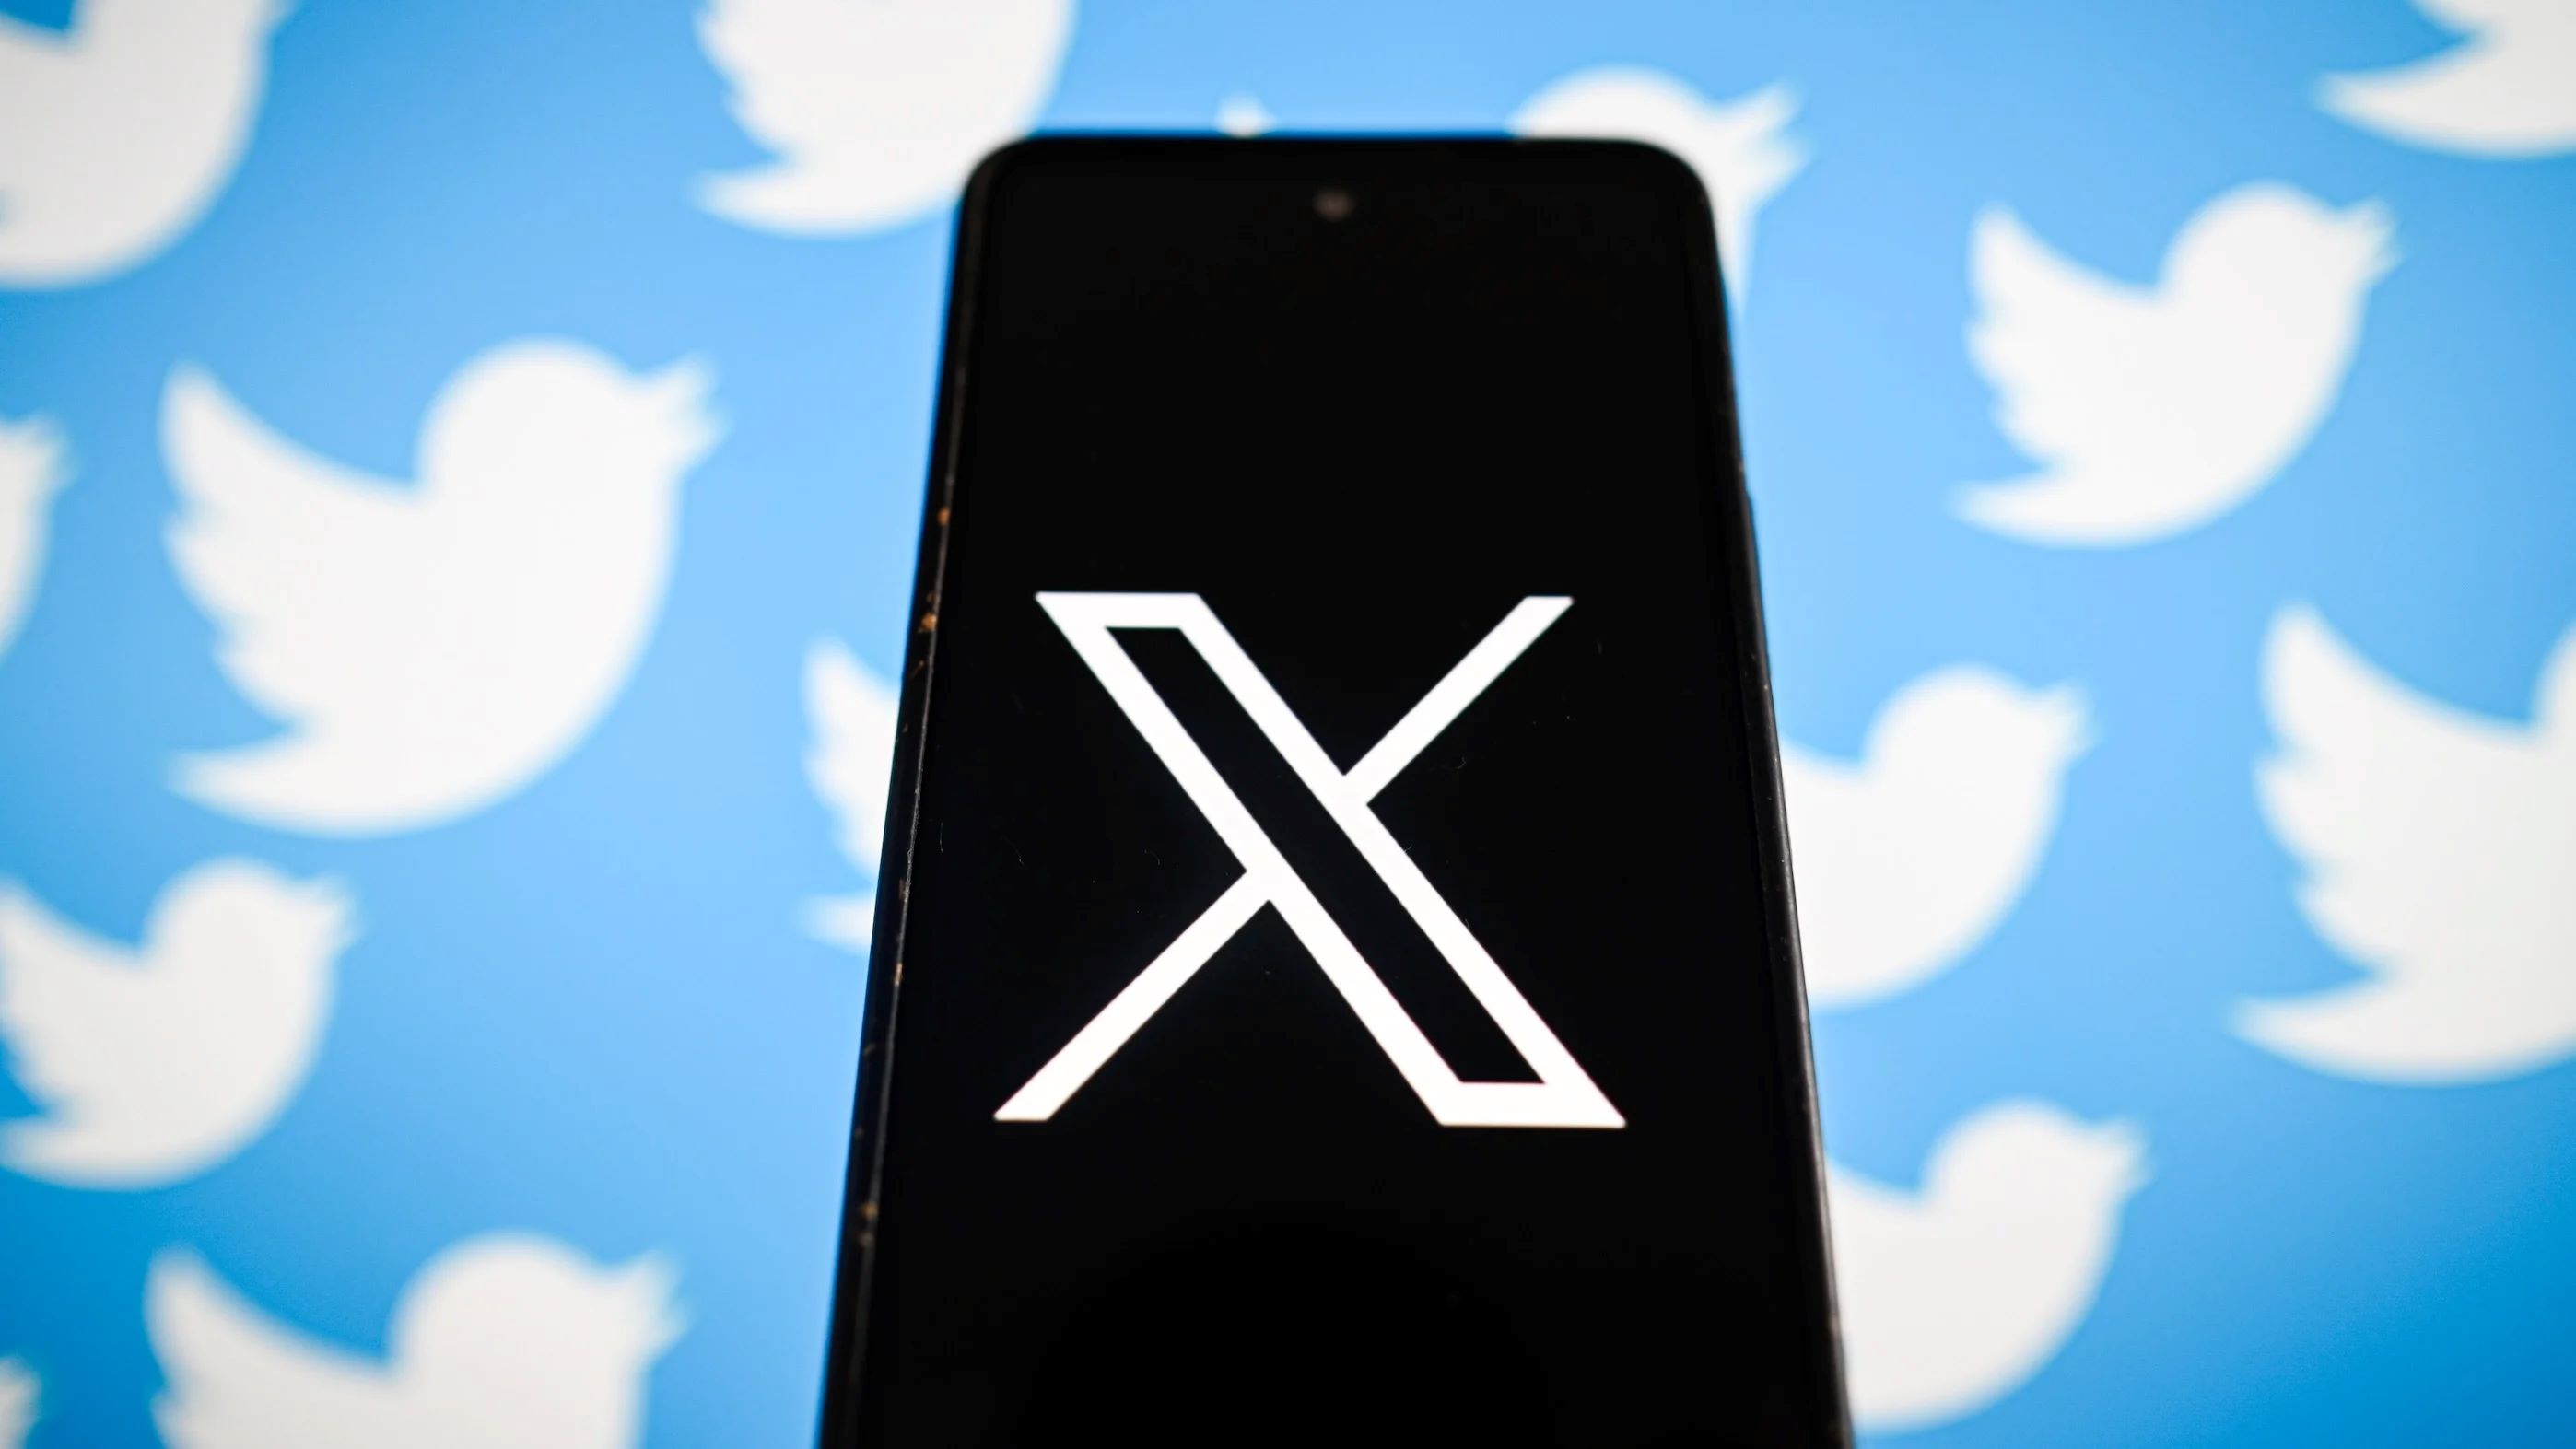 eu-finds-x-formerly-twitter-worst-for-disinformation-in-social-networks